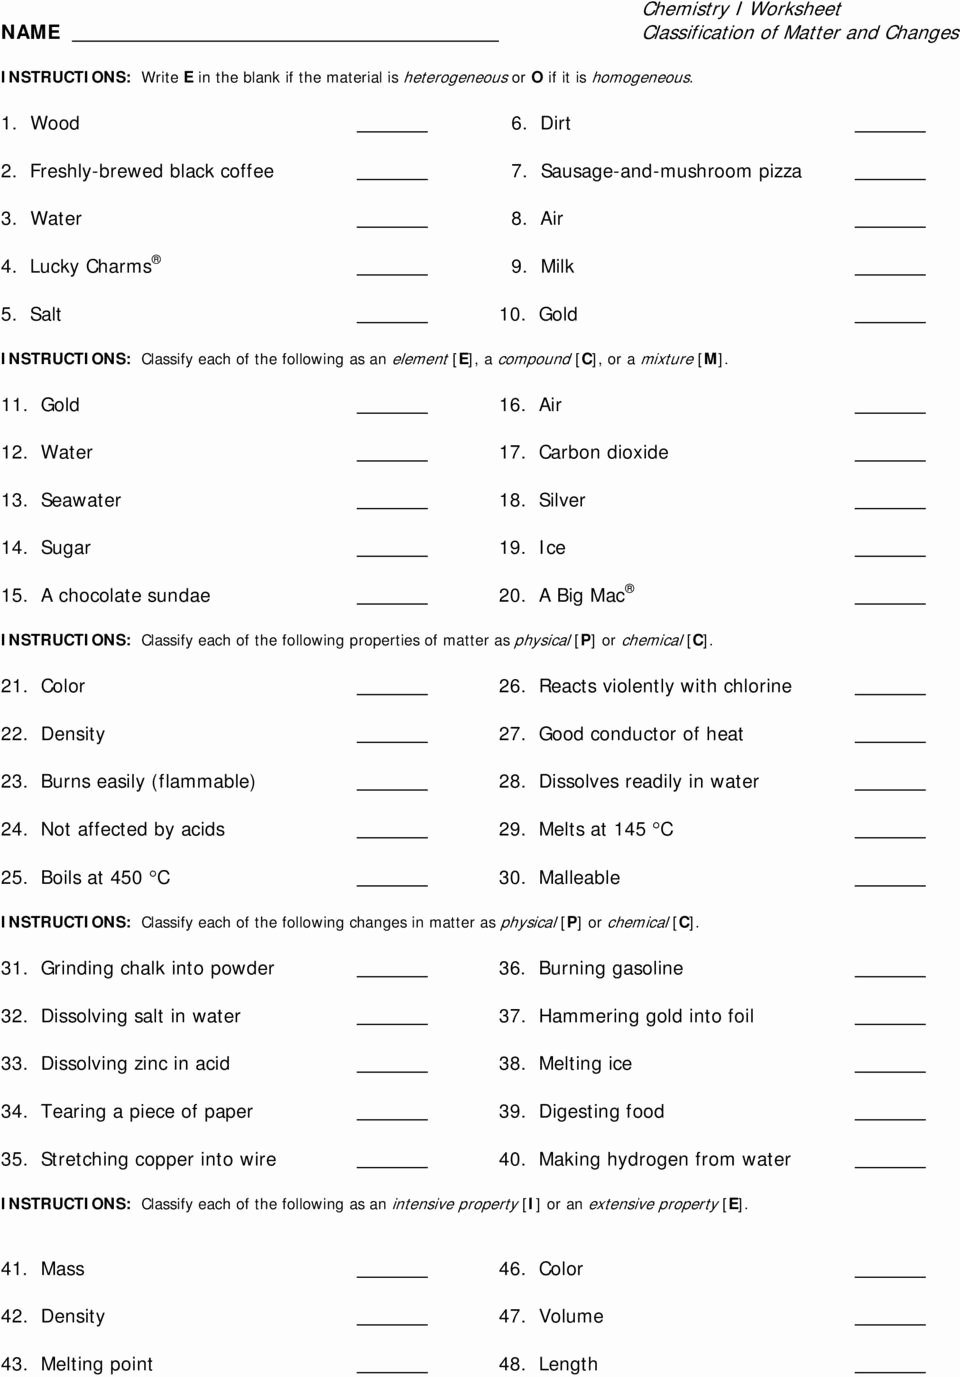 Chemistry Worksheet Matter 1 Answers Awesome solutions Worksheet 1 Classification Matter Types